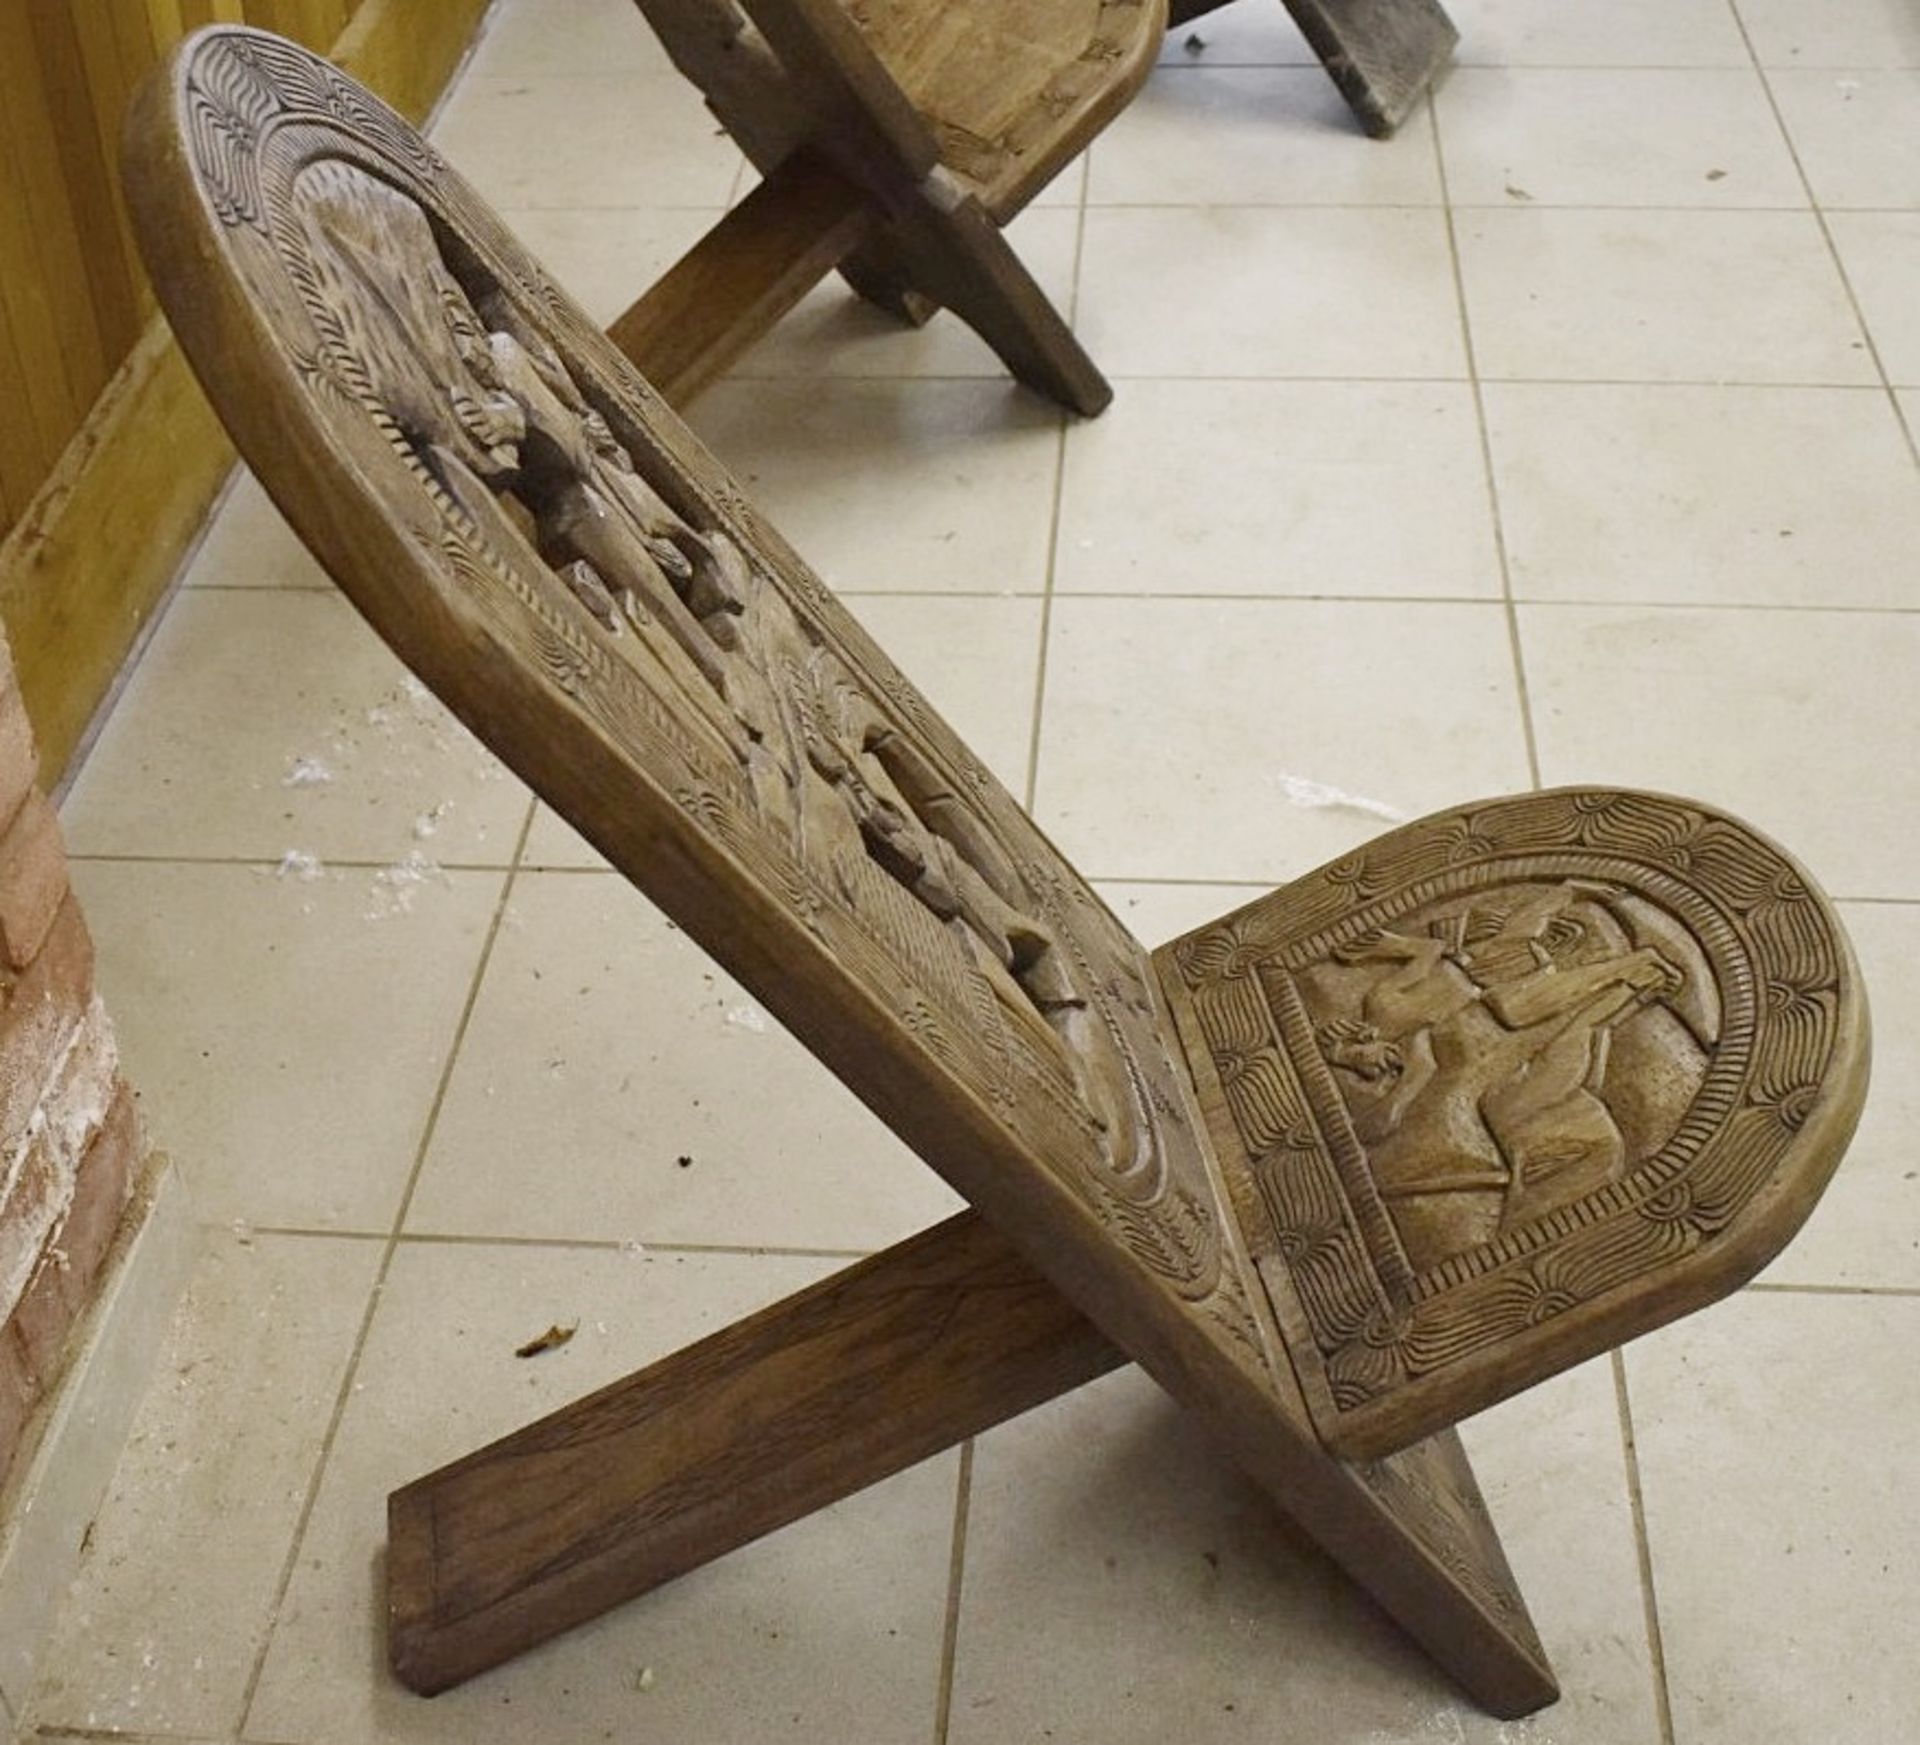 1 x Vintage Hand Carved African Hardwood Chair - From an Exclusive Hale Property - Image 4 of 4